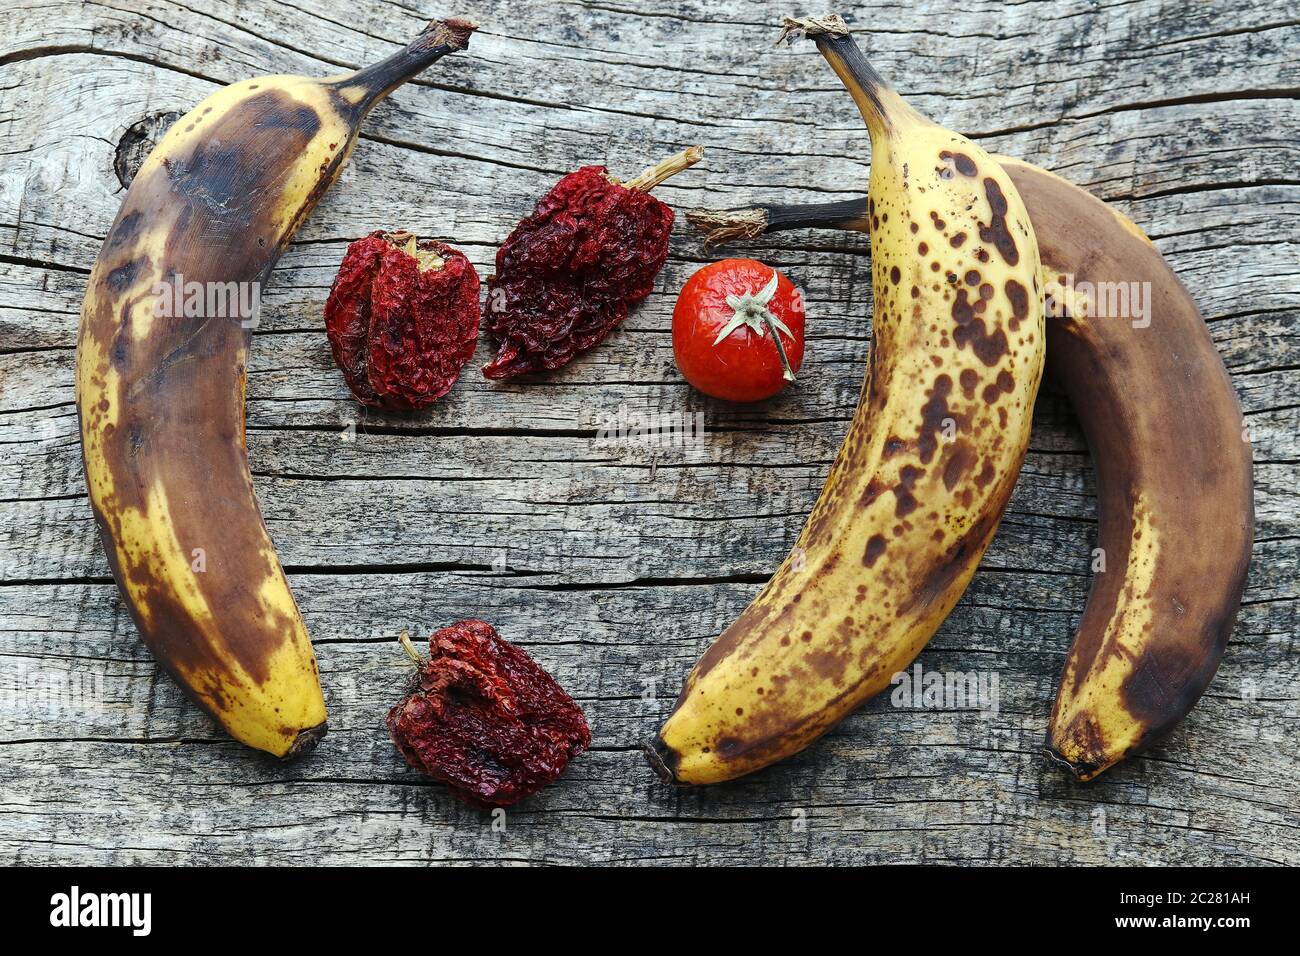 Old brown bananas and dried peppers and tomatoes. Old fruit and vegetables Stock Photo